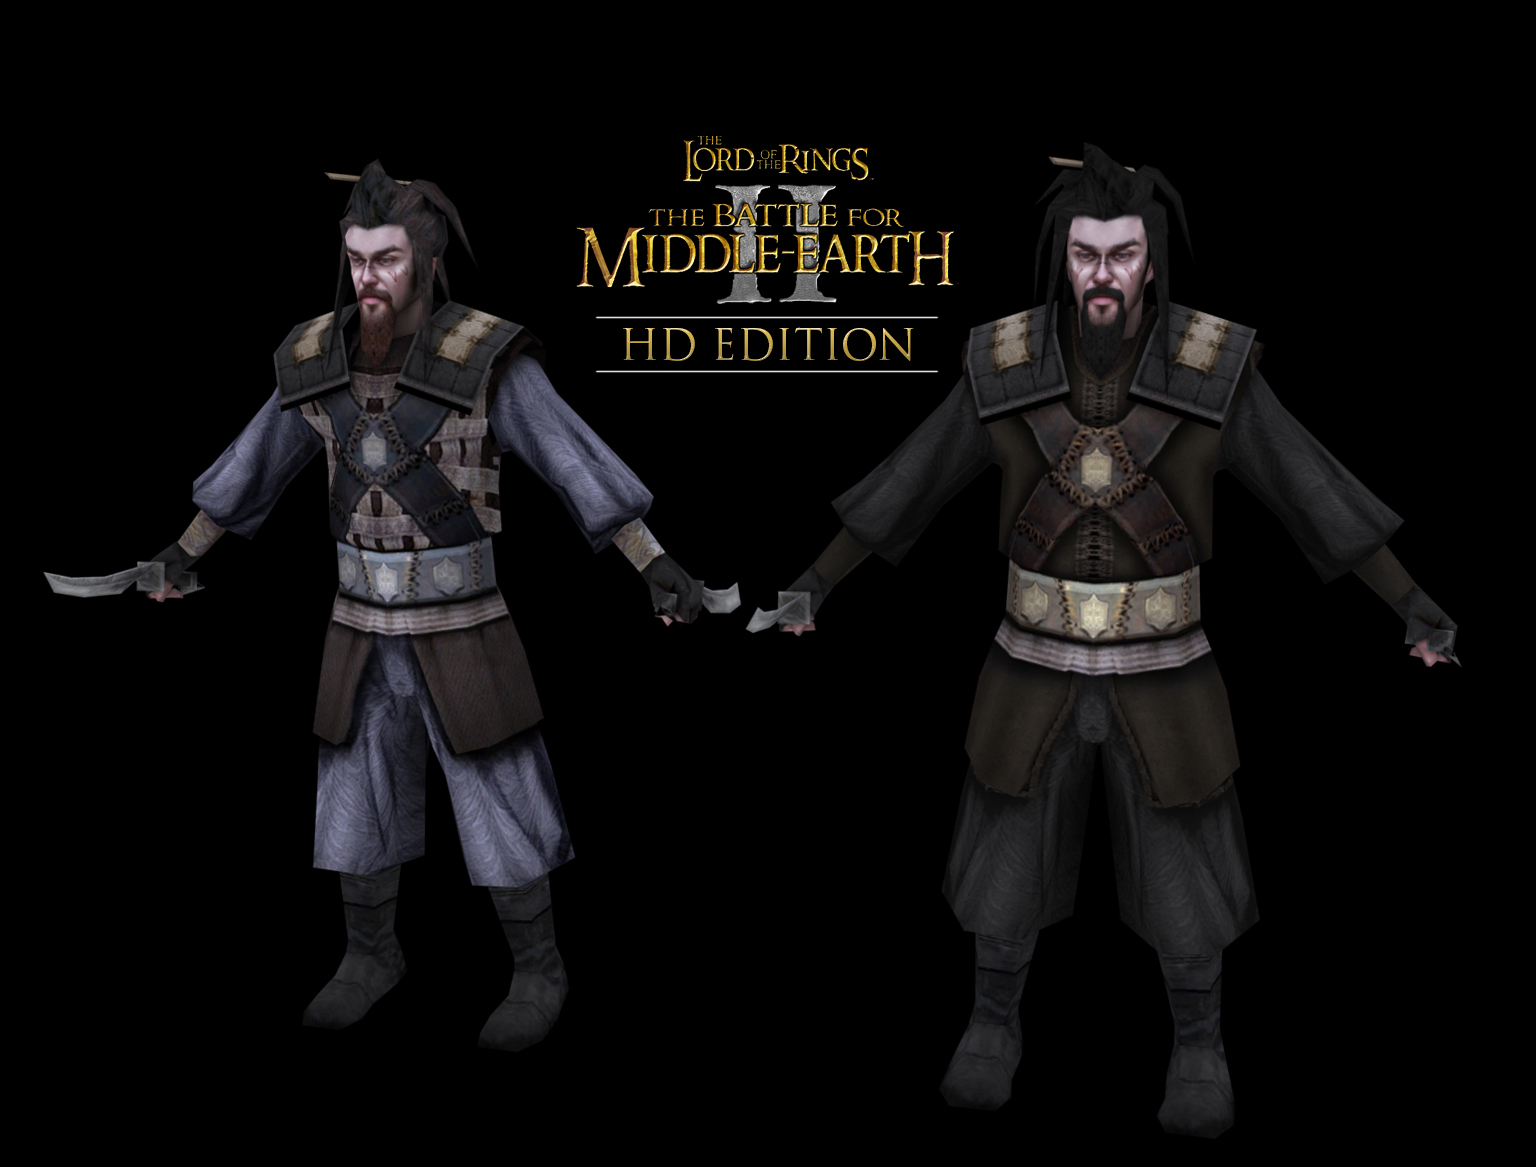 Corsairs of Umbar image - Battle for Middle Earth 2: HD Edition